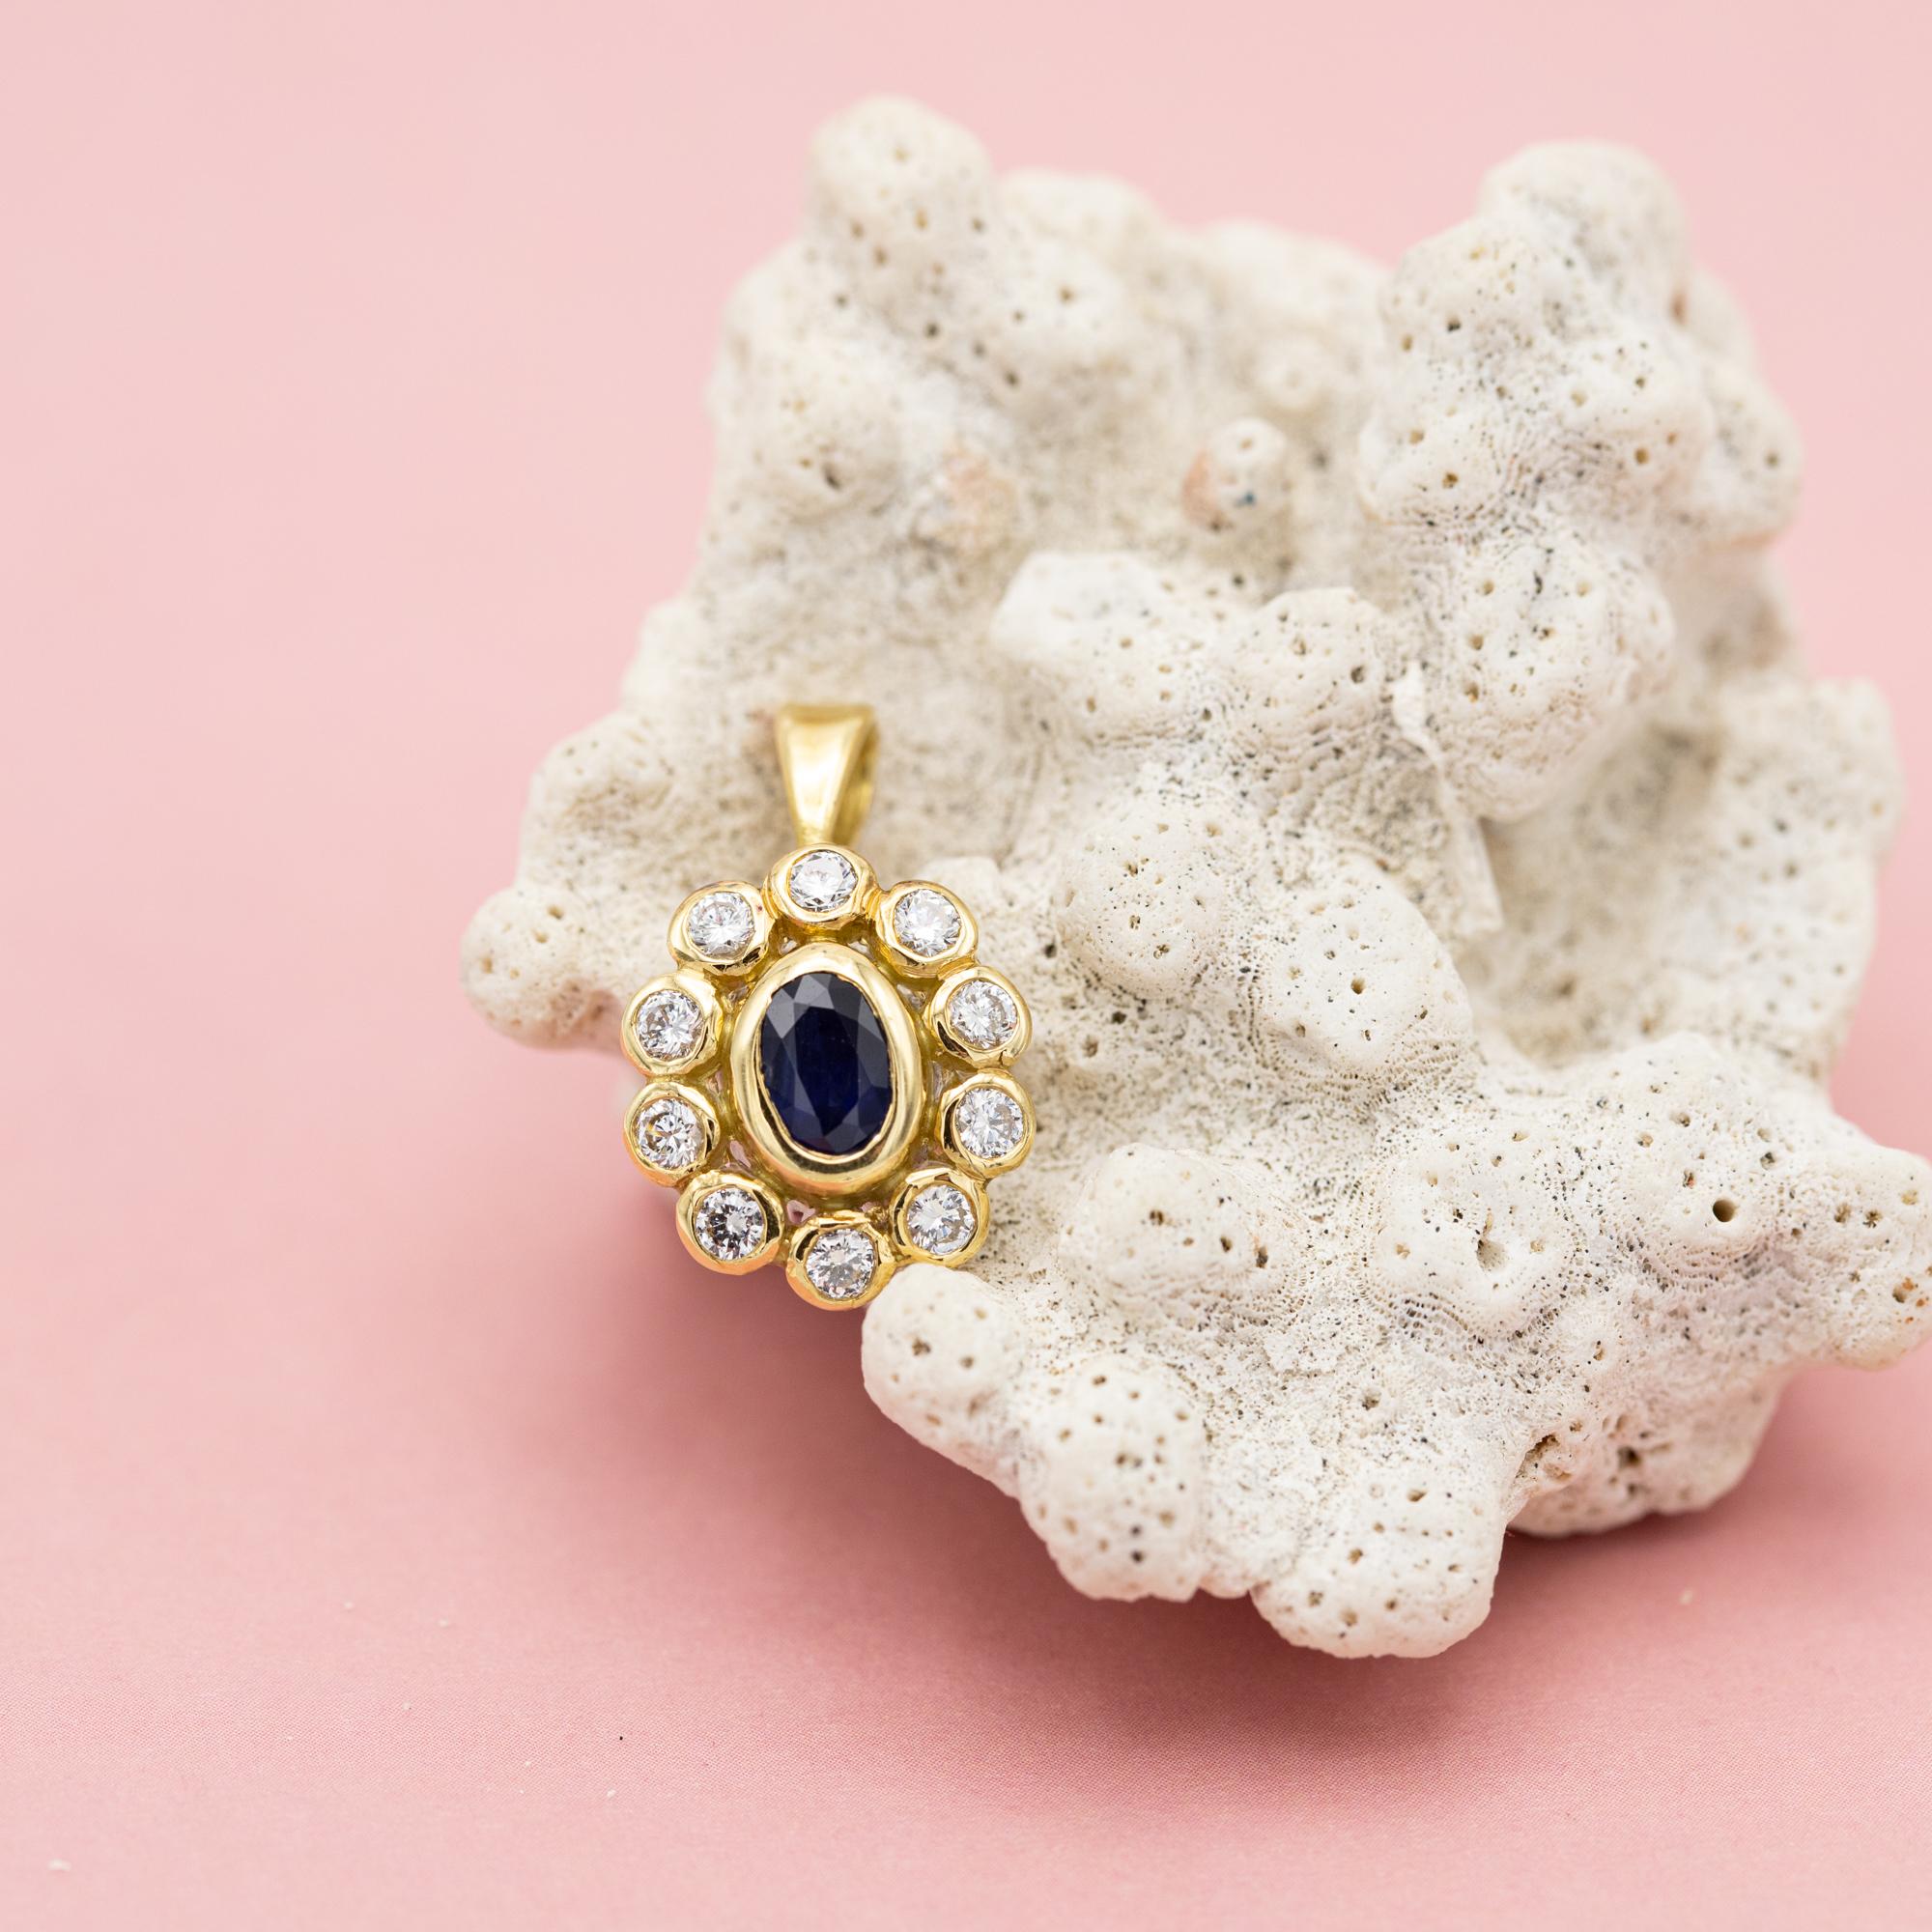 For sale is this wonderful floral cluster charm. This diamond & sapphire charm depicts a beautiful little flower covered with ten sparkly brilliant cut diamonds and one oval cut sapphire in its center. These diamonds combine for approximately 0,6